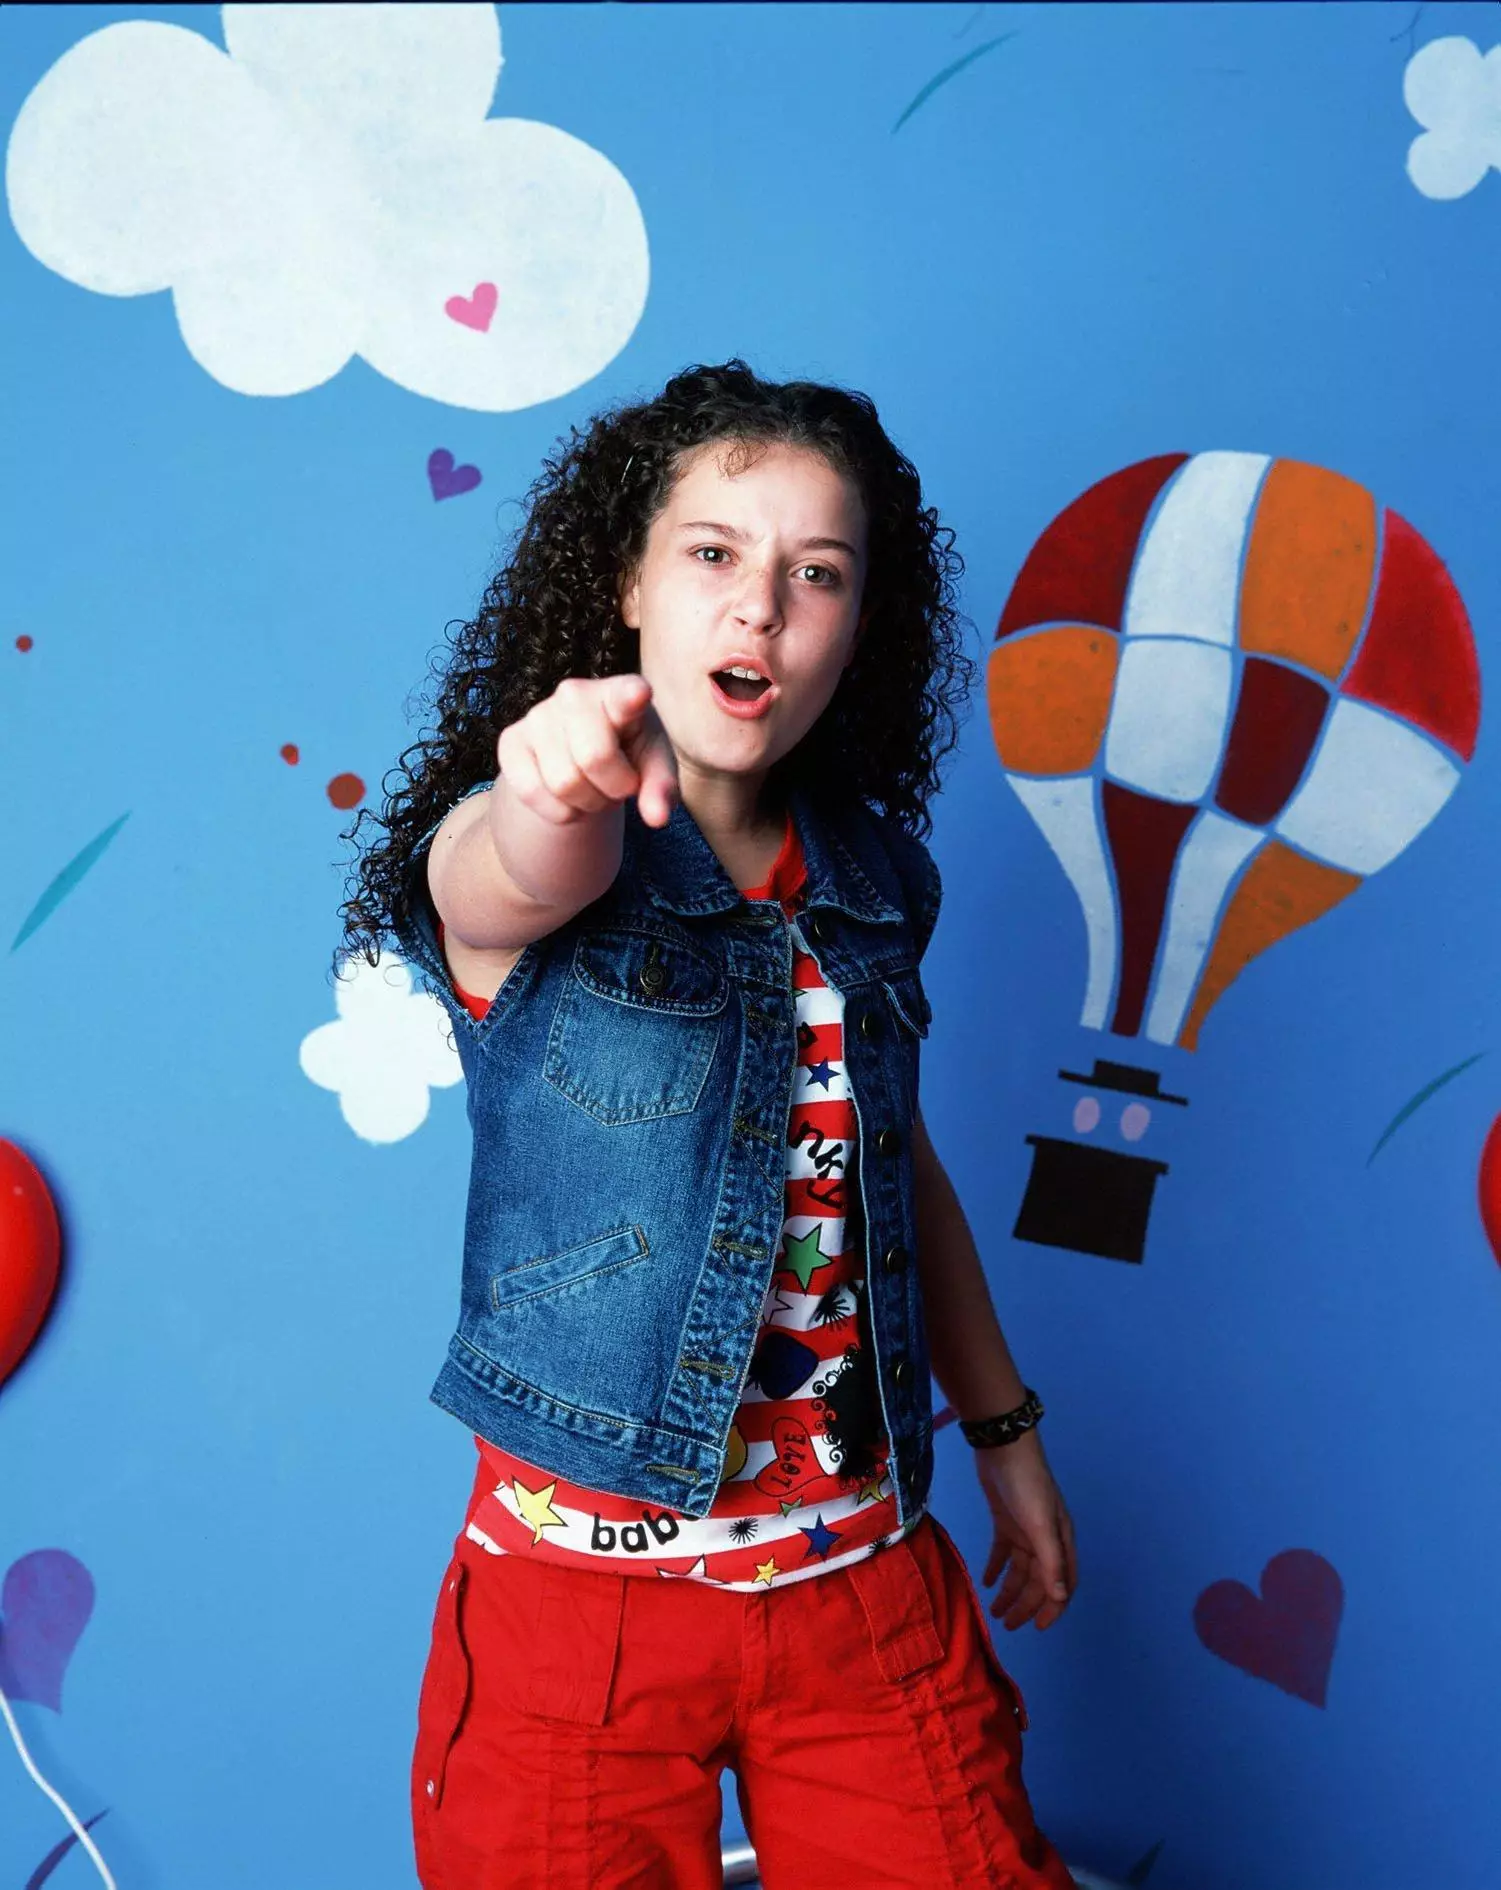 The Tony Stark of CBBC. Dani Harmer has starred and guest-starred as Tracy Beaker in several series and spin-offs (